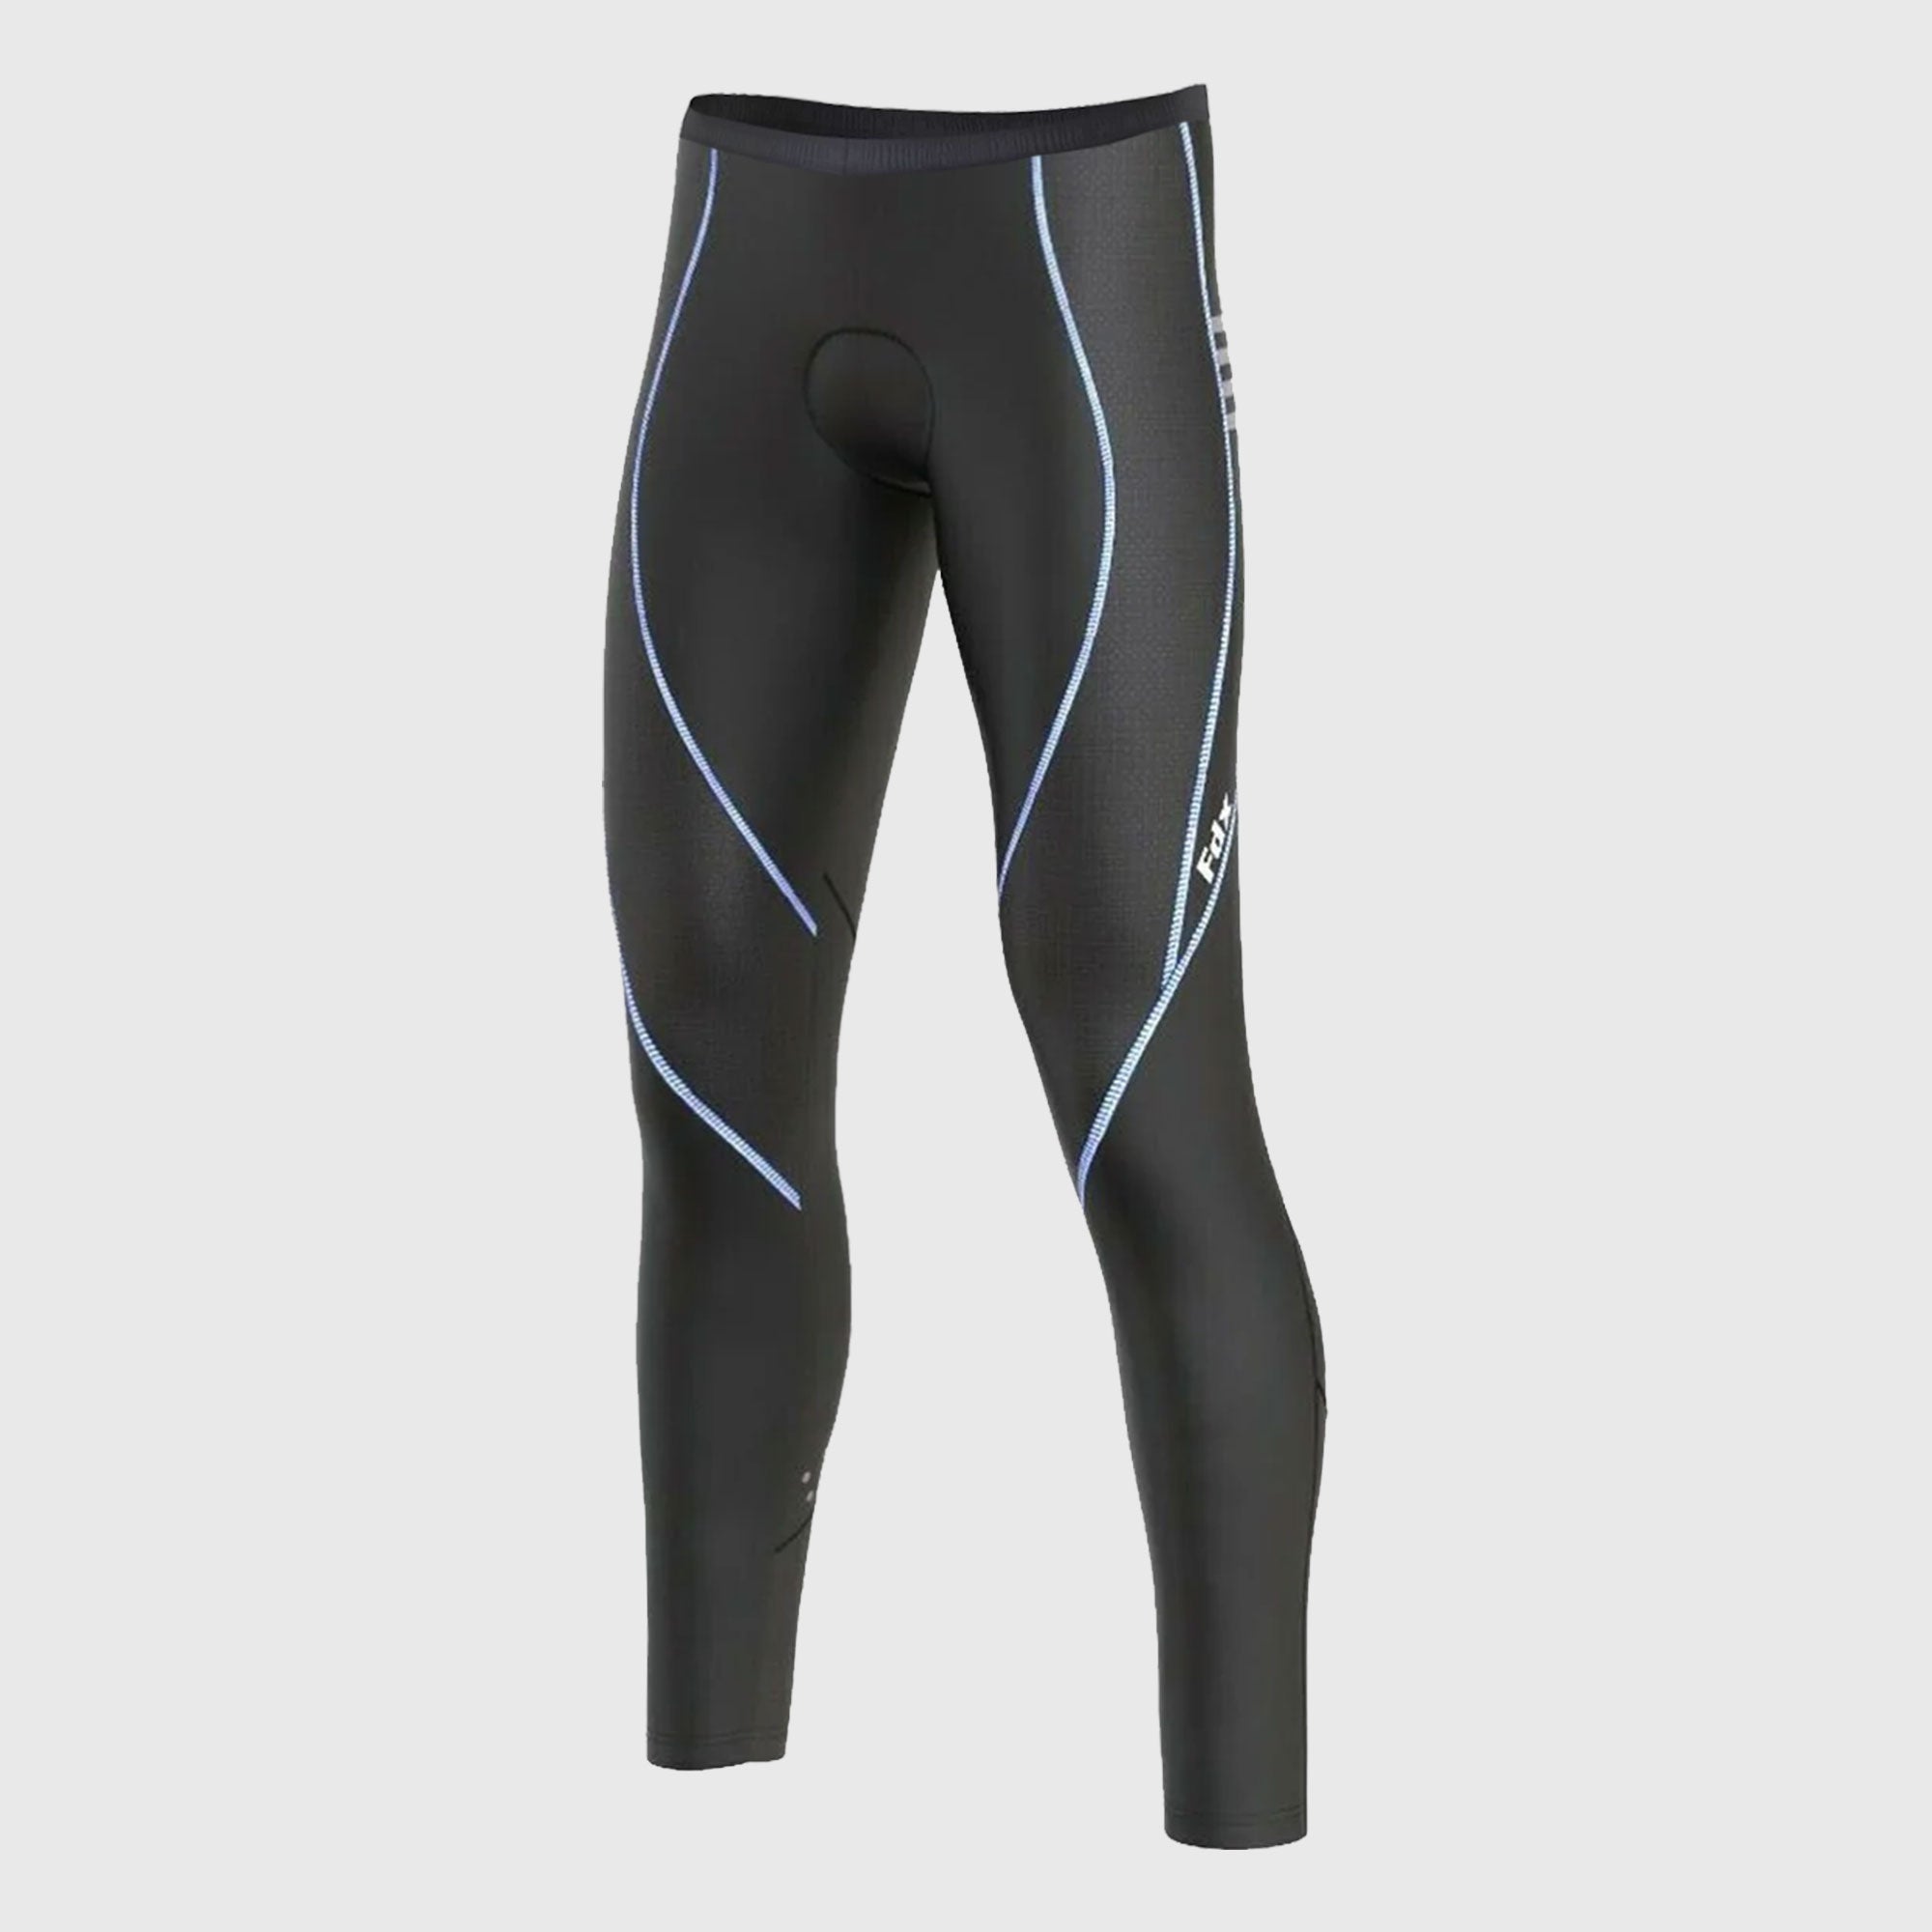 Buy Women's Cycling Tights Padded Trouser Thermal Long Pants